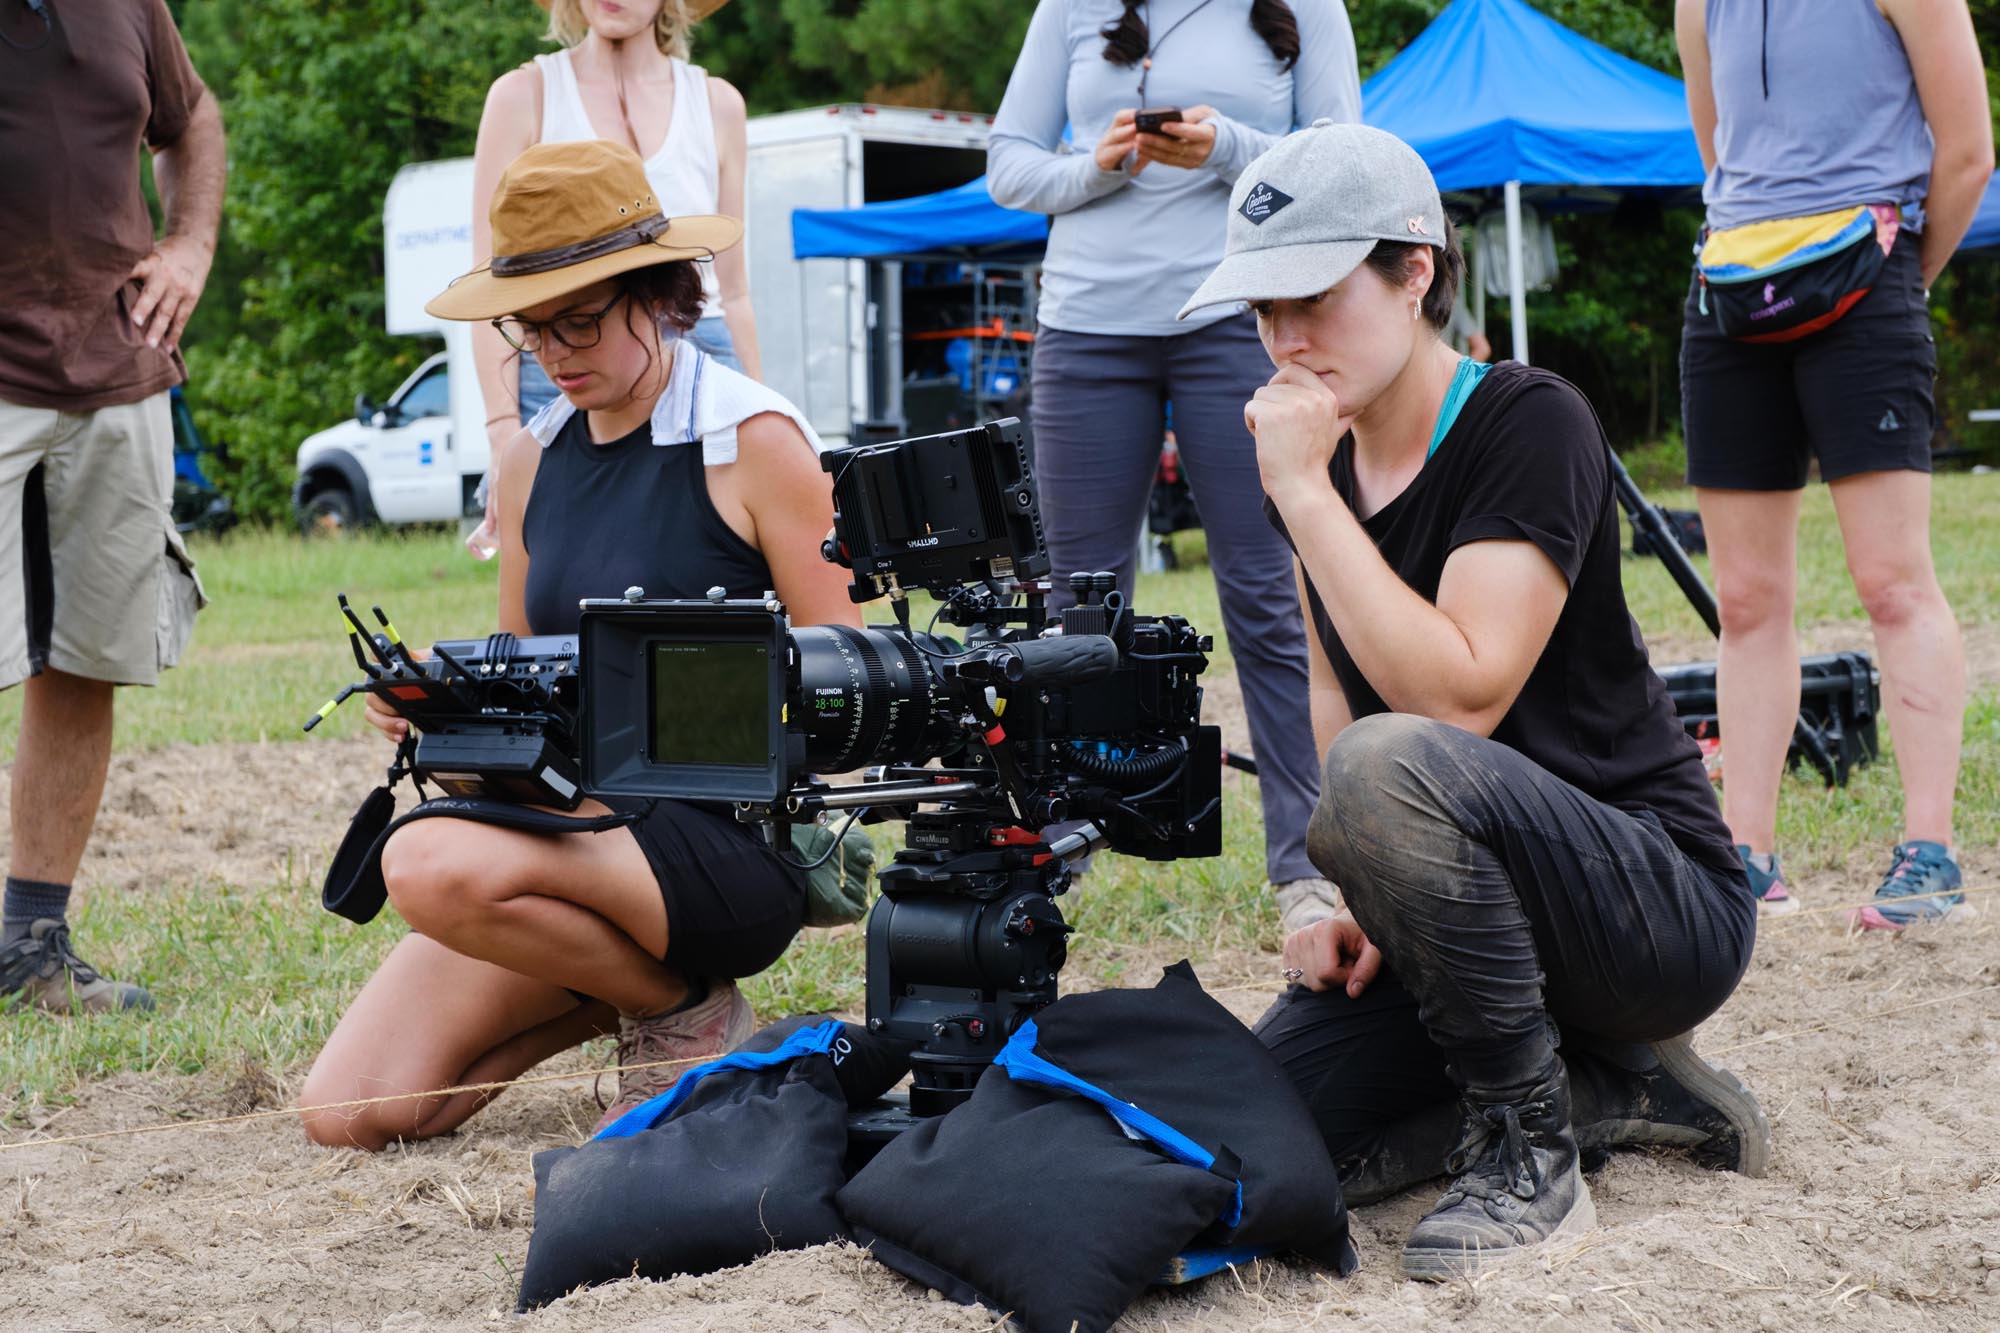 A female director and DP set up a shot in a grassy field